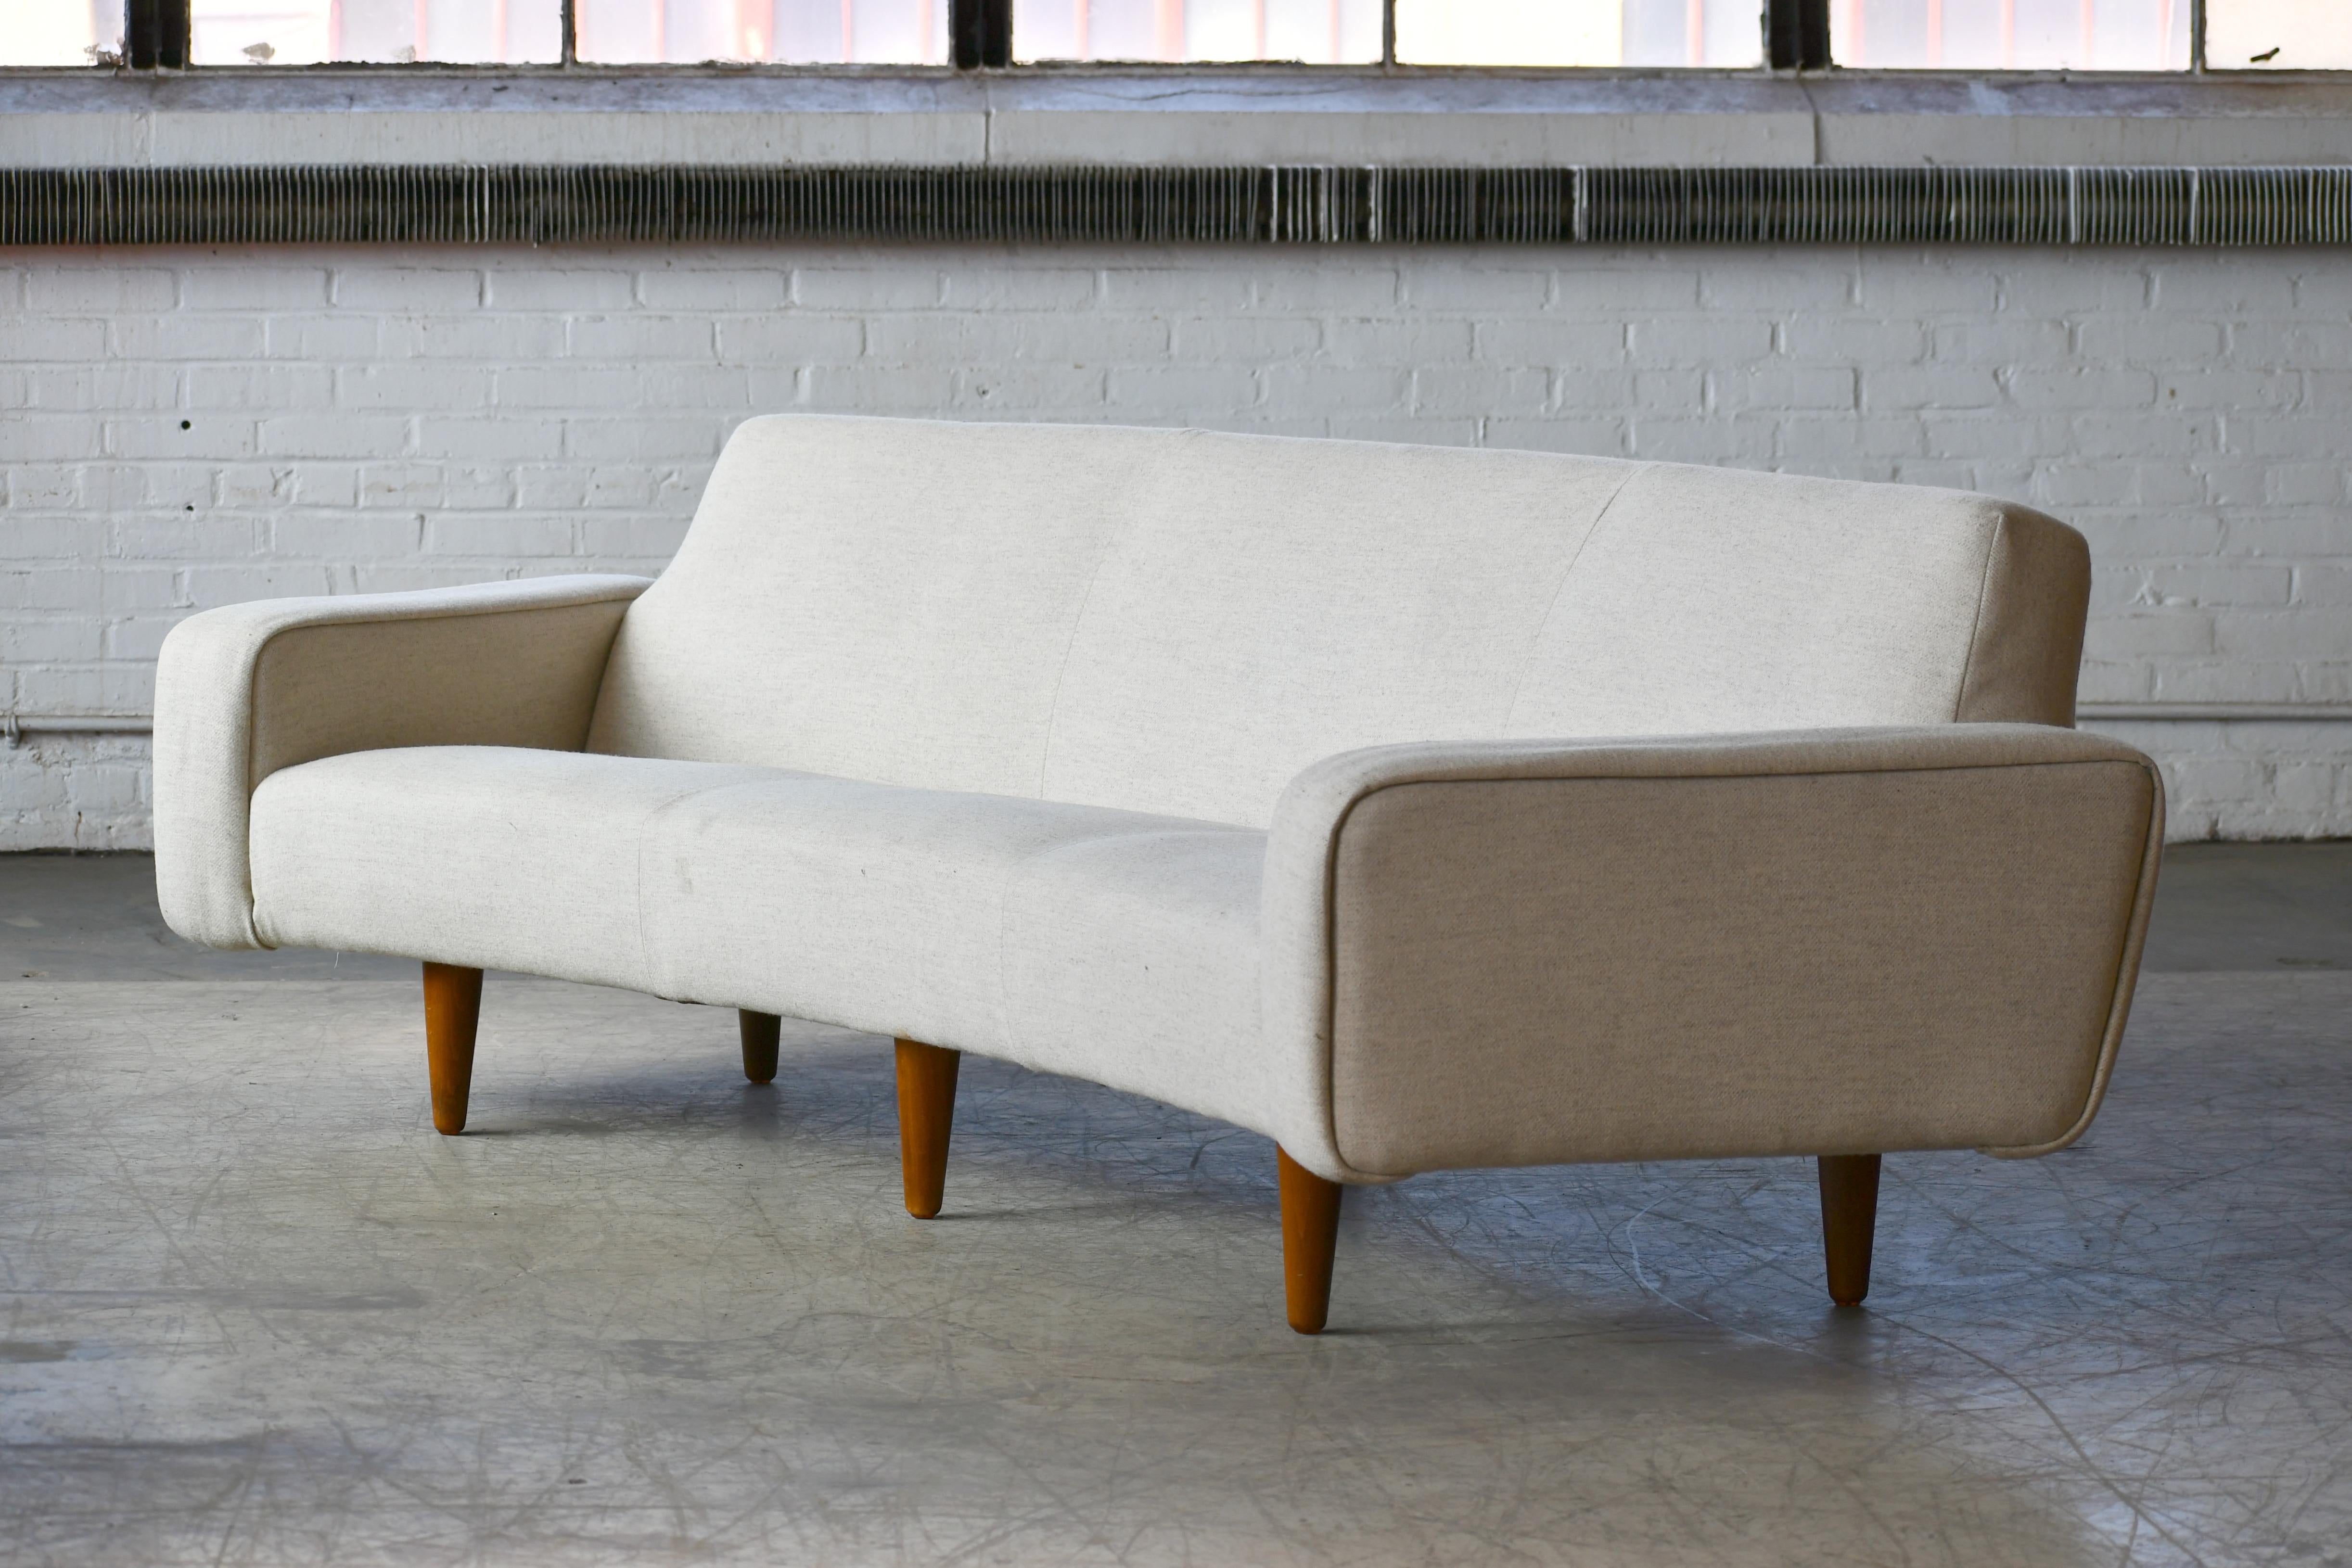 Illum Wikkelso is known for his fantastic sofa and chair designs and this rare model 450 sofa designed in 1958 and manufactured by Aarhus Polstrings Møbelfabrik in the 1960s is absolutely one of the finest to come out of the Danish midcentury era.